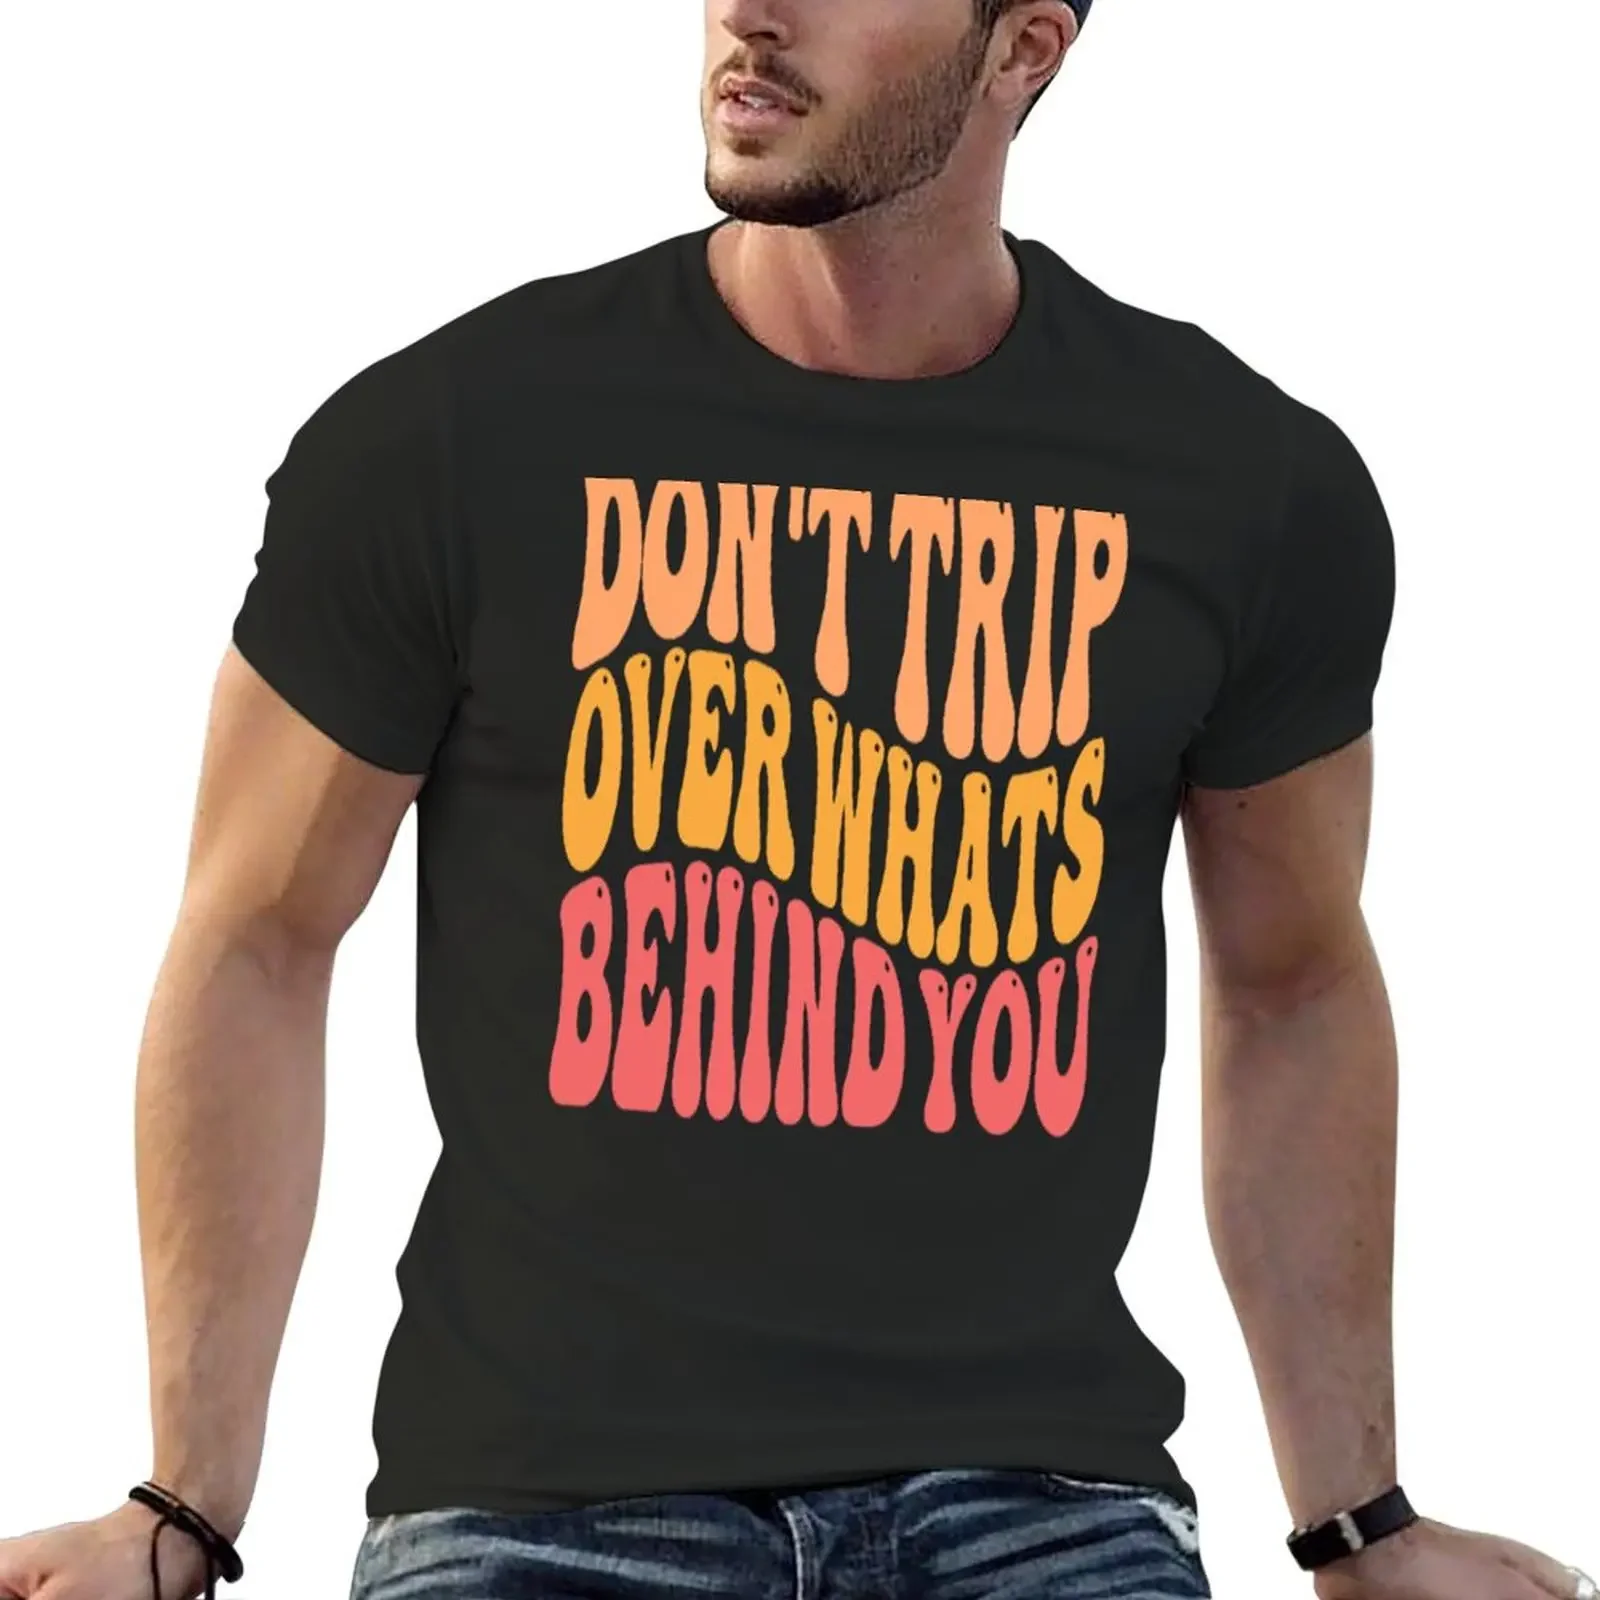 

Don't Trip Over What's Behind You Self Care Quote T-shirt boys whites plus size tops summer top sweat shirts, men